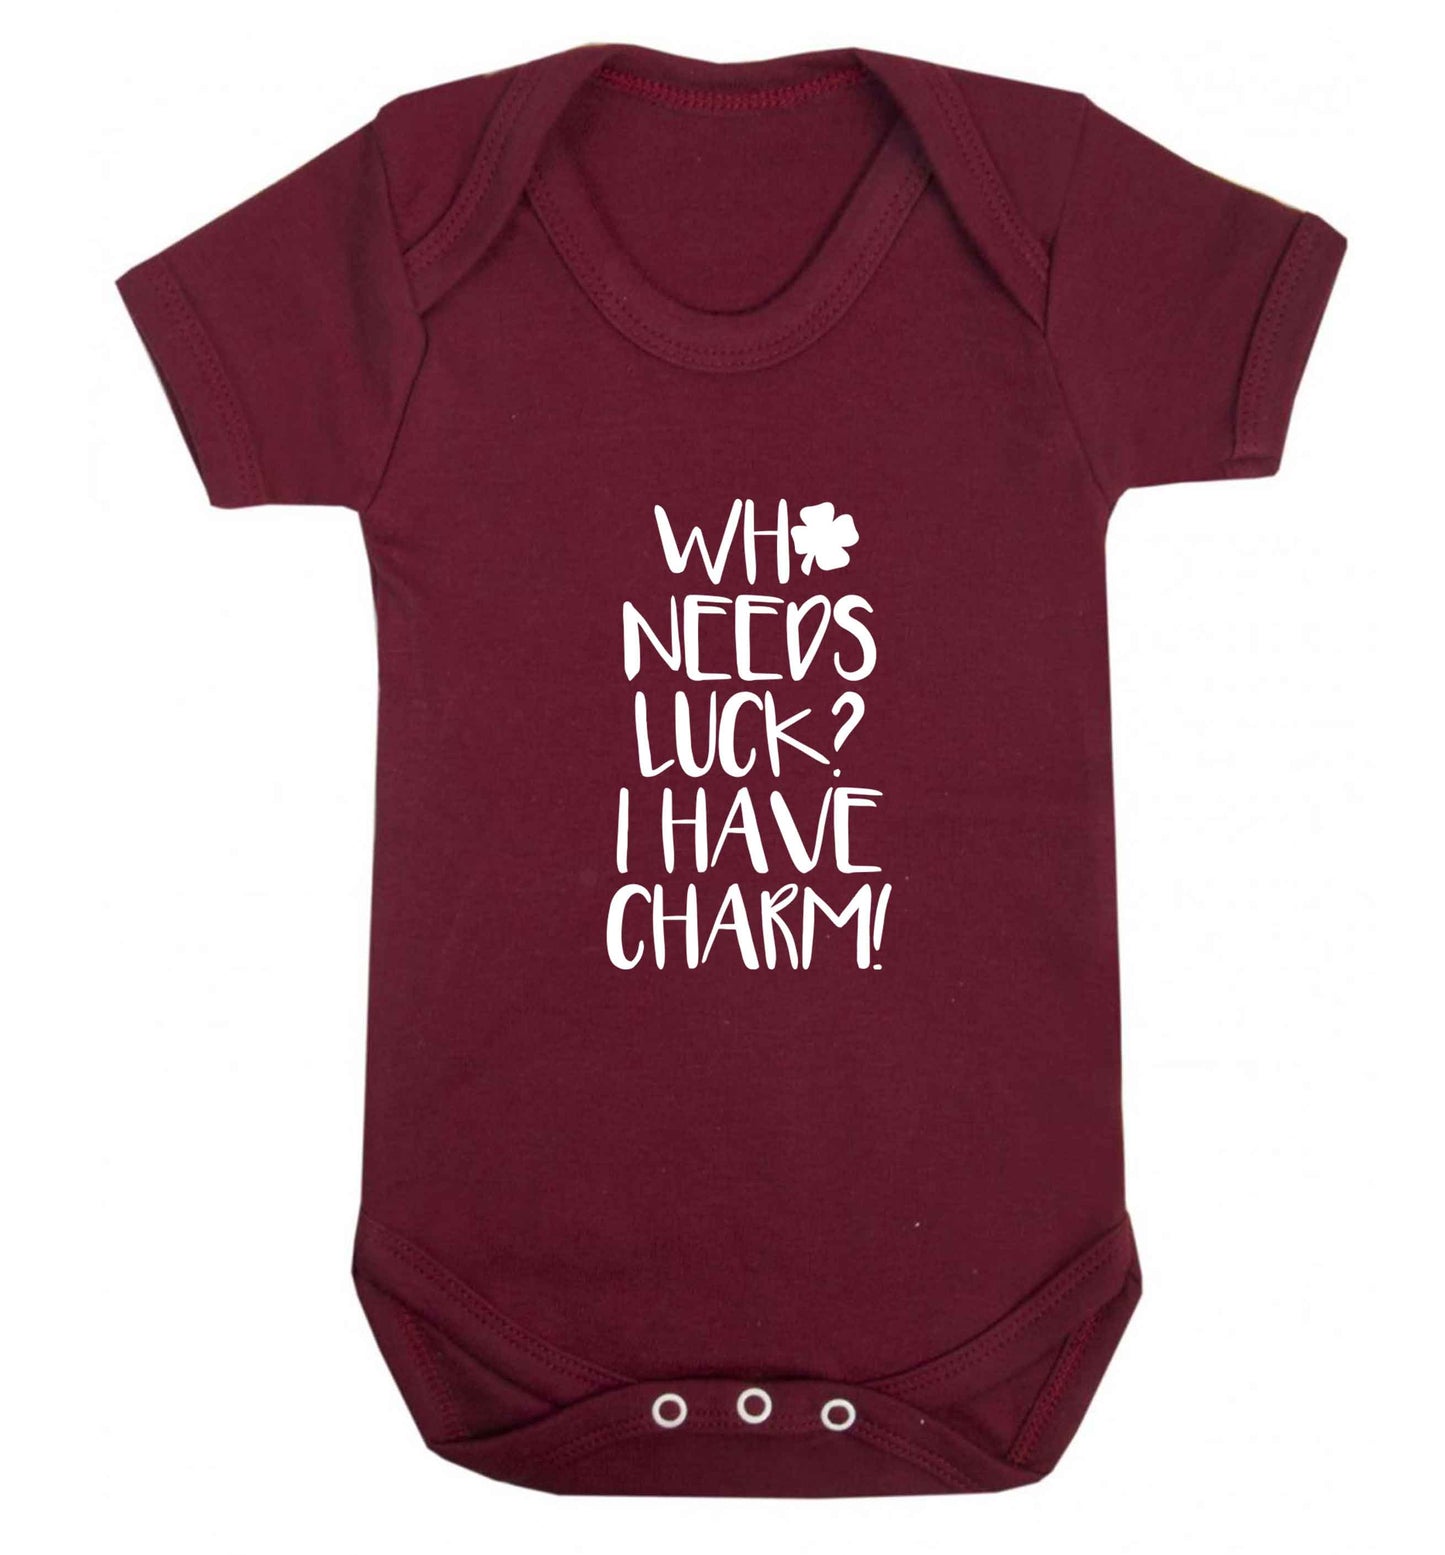 Who needs luck? I have charm! baby vest maroon 18-24 months